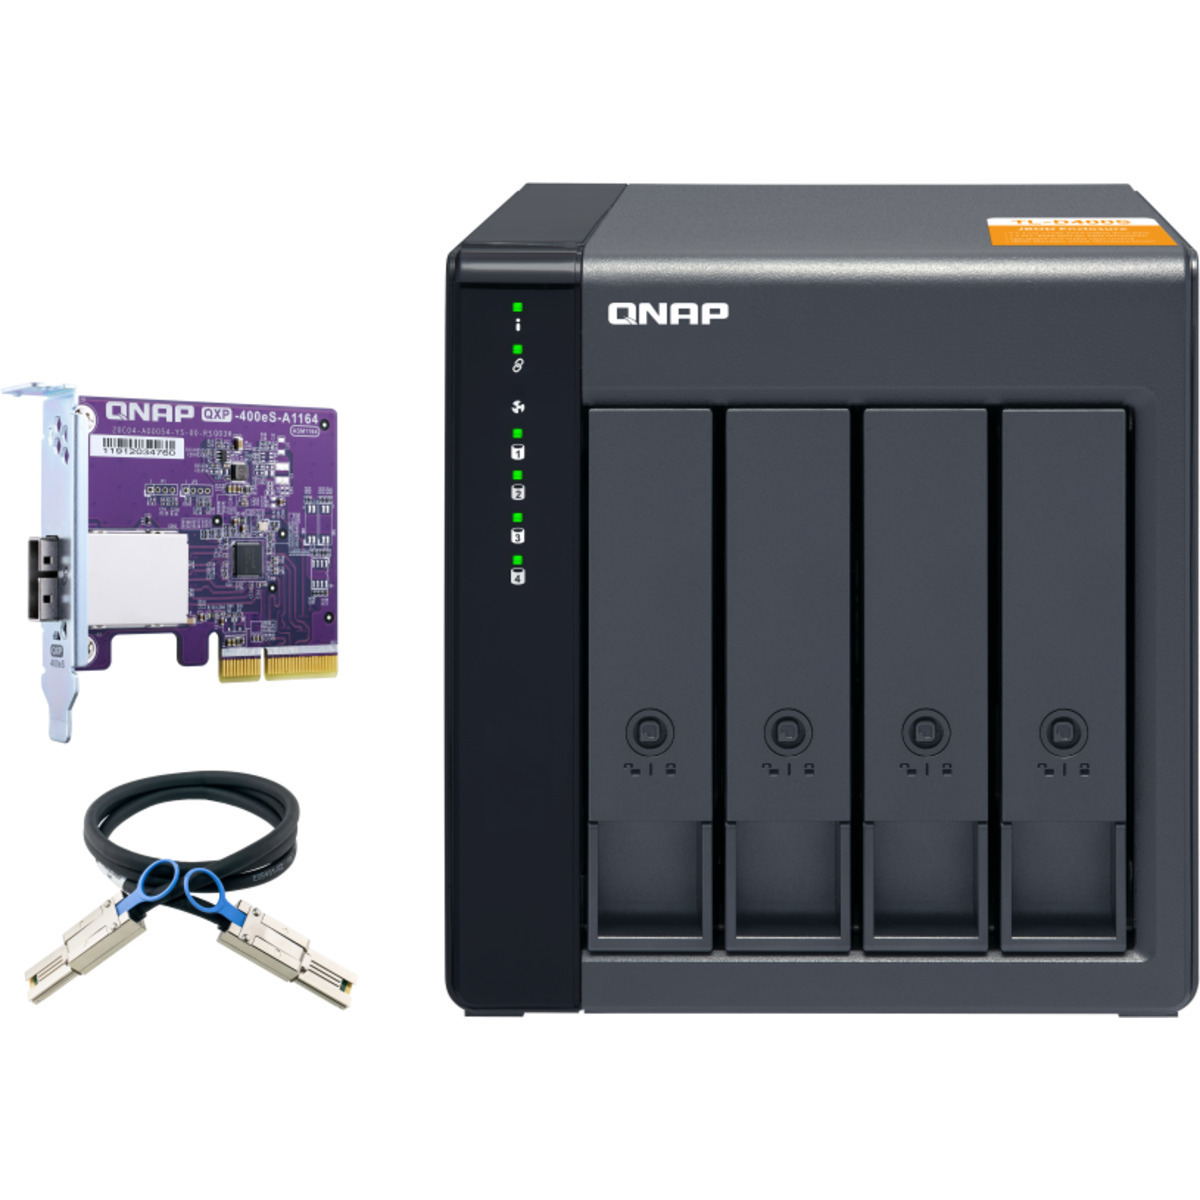 buy $569 QNAP TL-D400S External Expansion Drive 16tb Desktop Expansion Enclosure 4x4000gb Toshiba MN Series MN08ADA400E 3.5 7200rpm SATA 6Gb/s HDD NAS Class Drives Installed - Burn-In Tested - ON SALE - nas headquarters buy network attached storage server device das new raid-5 free shipping simply usa TL-D400S External Expansion Drive